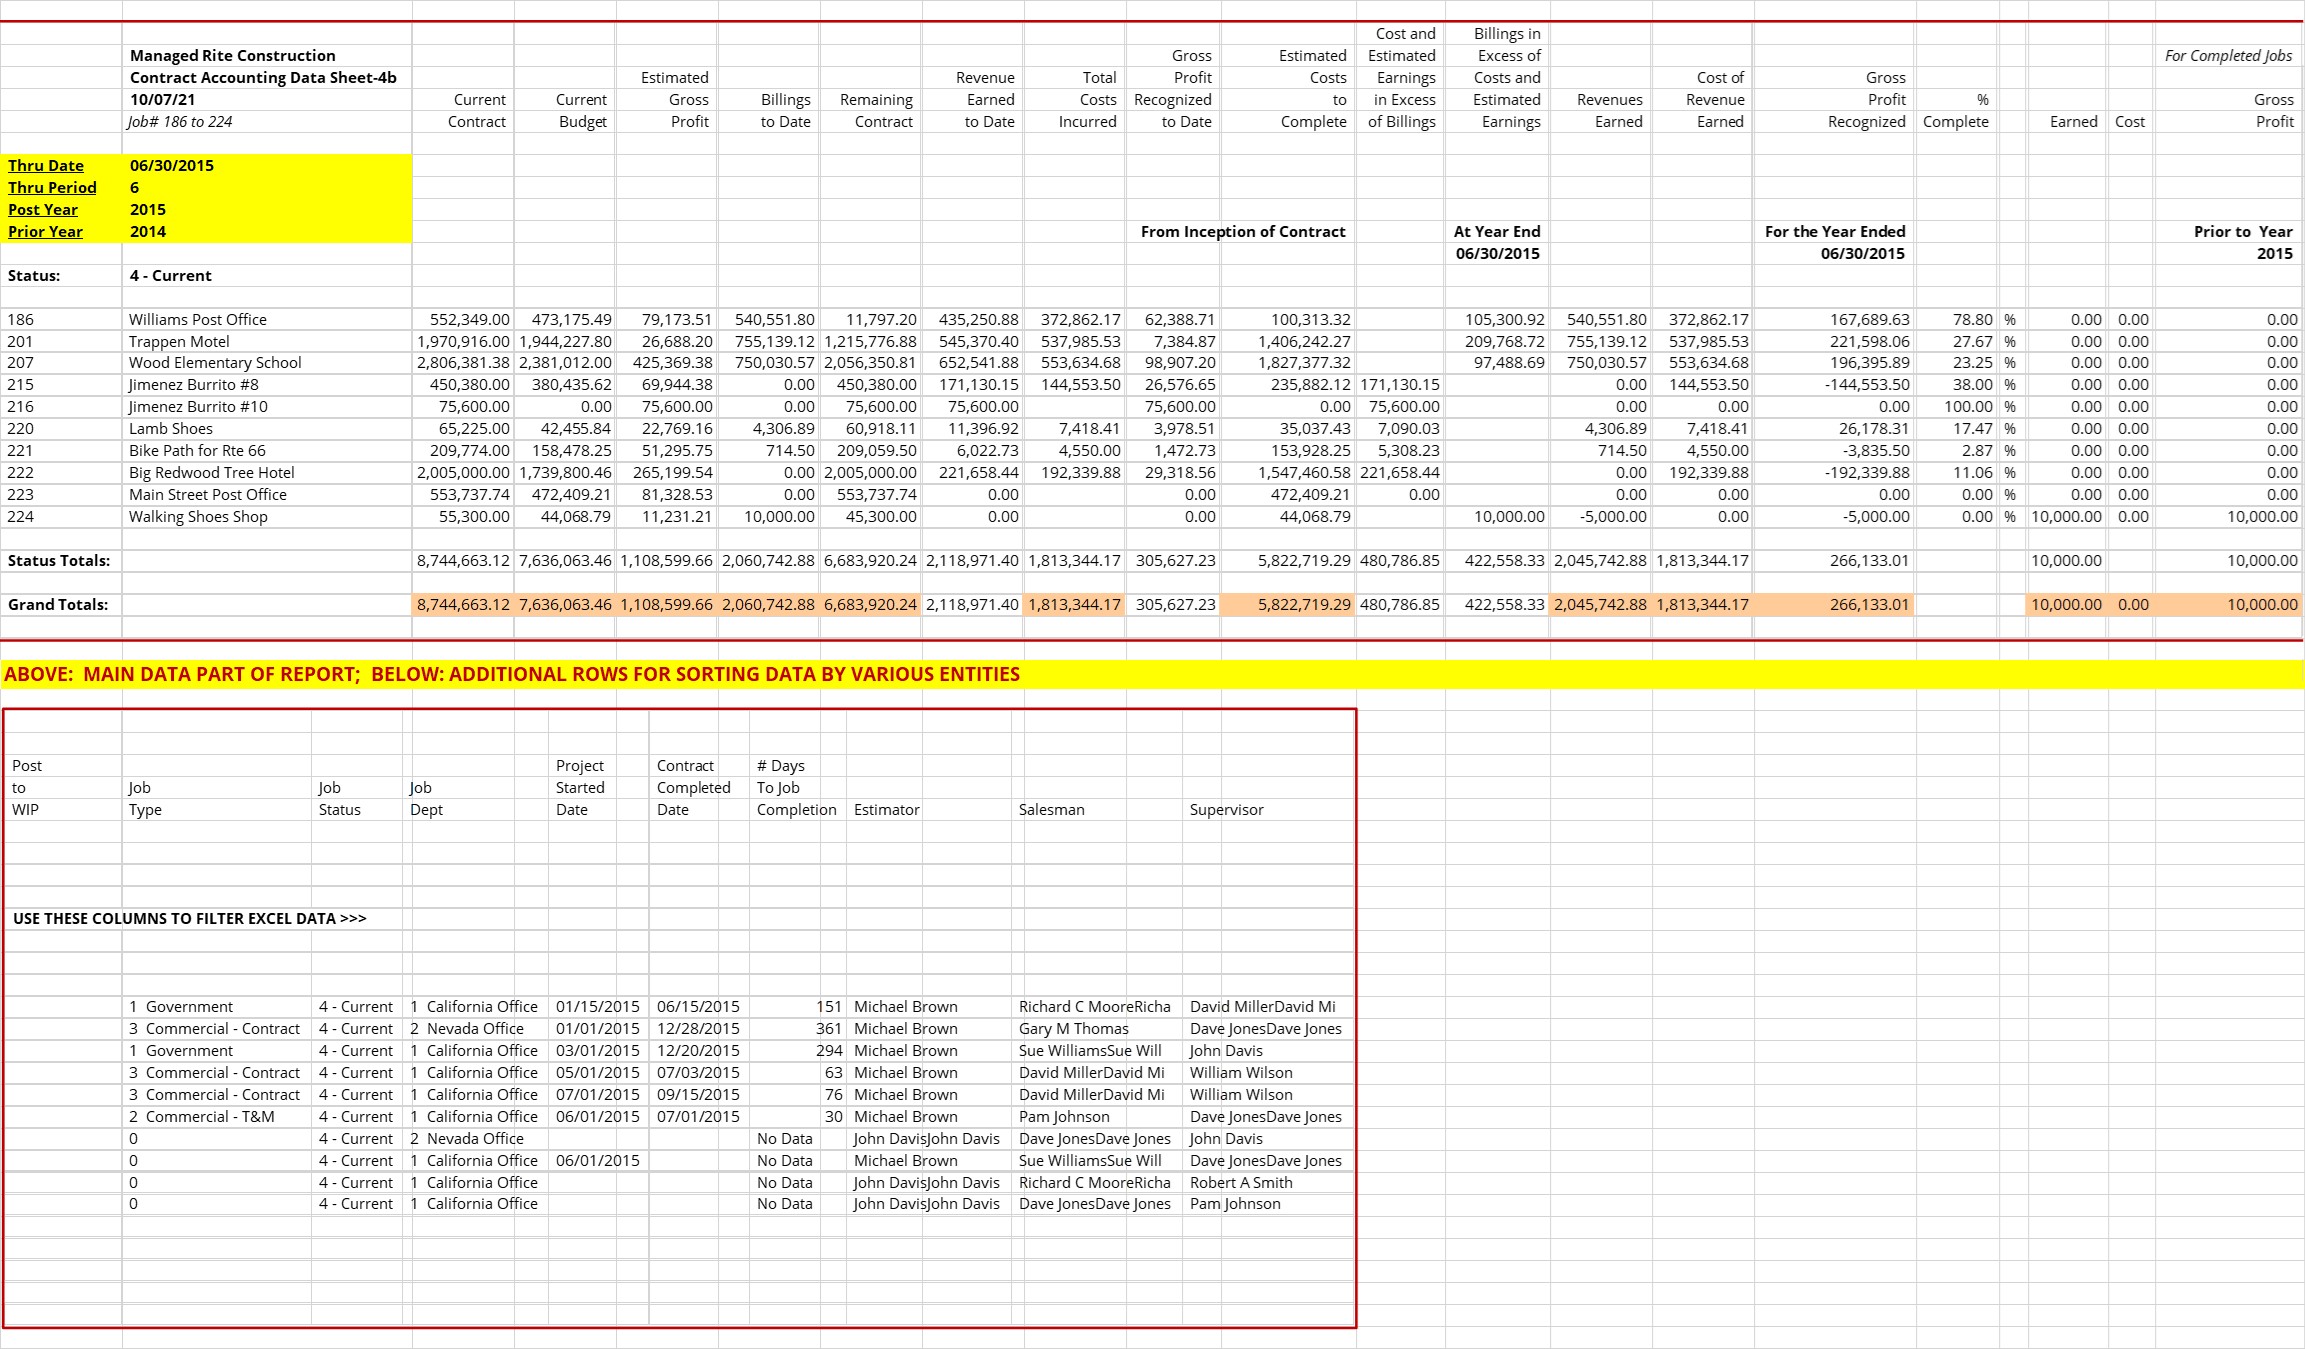 Contract Accounting Data Sheet